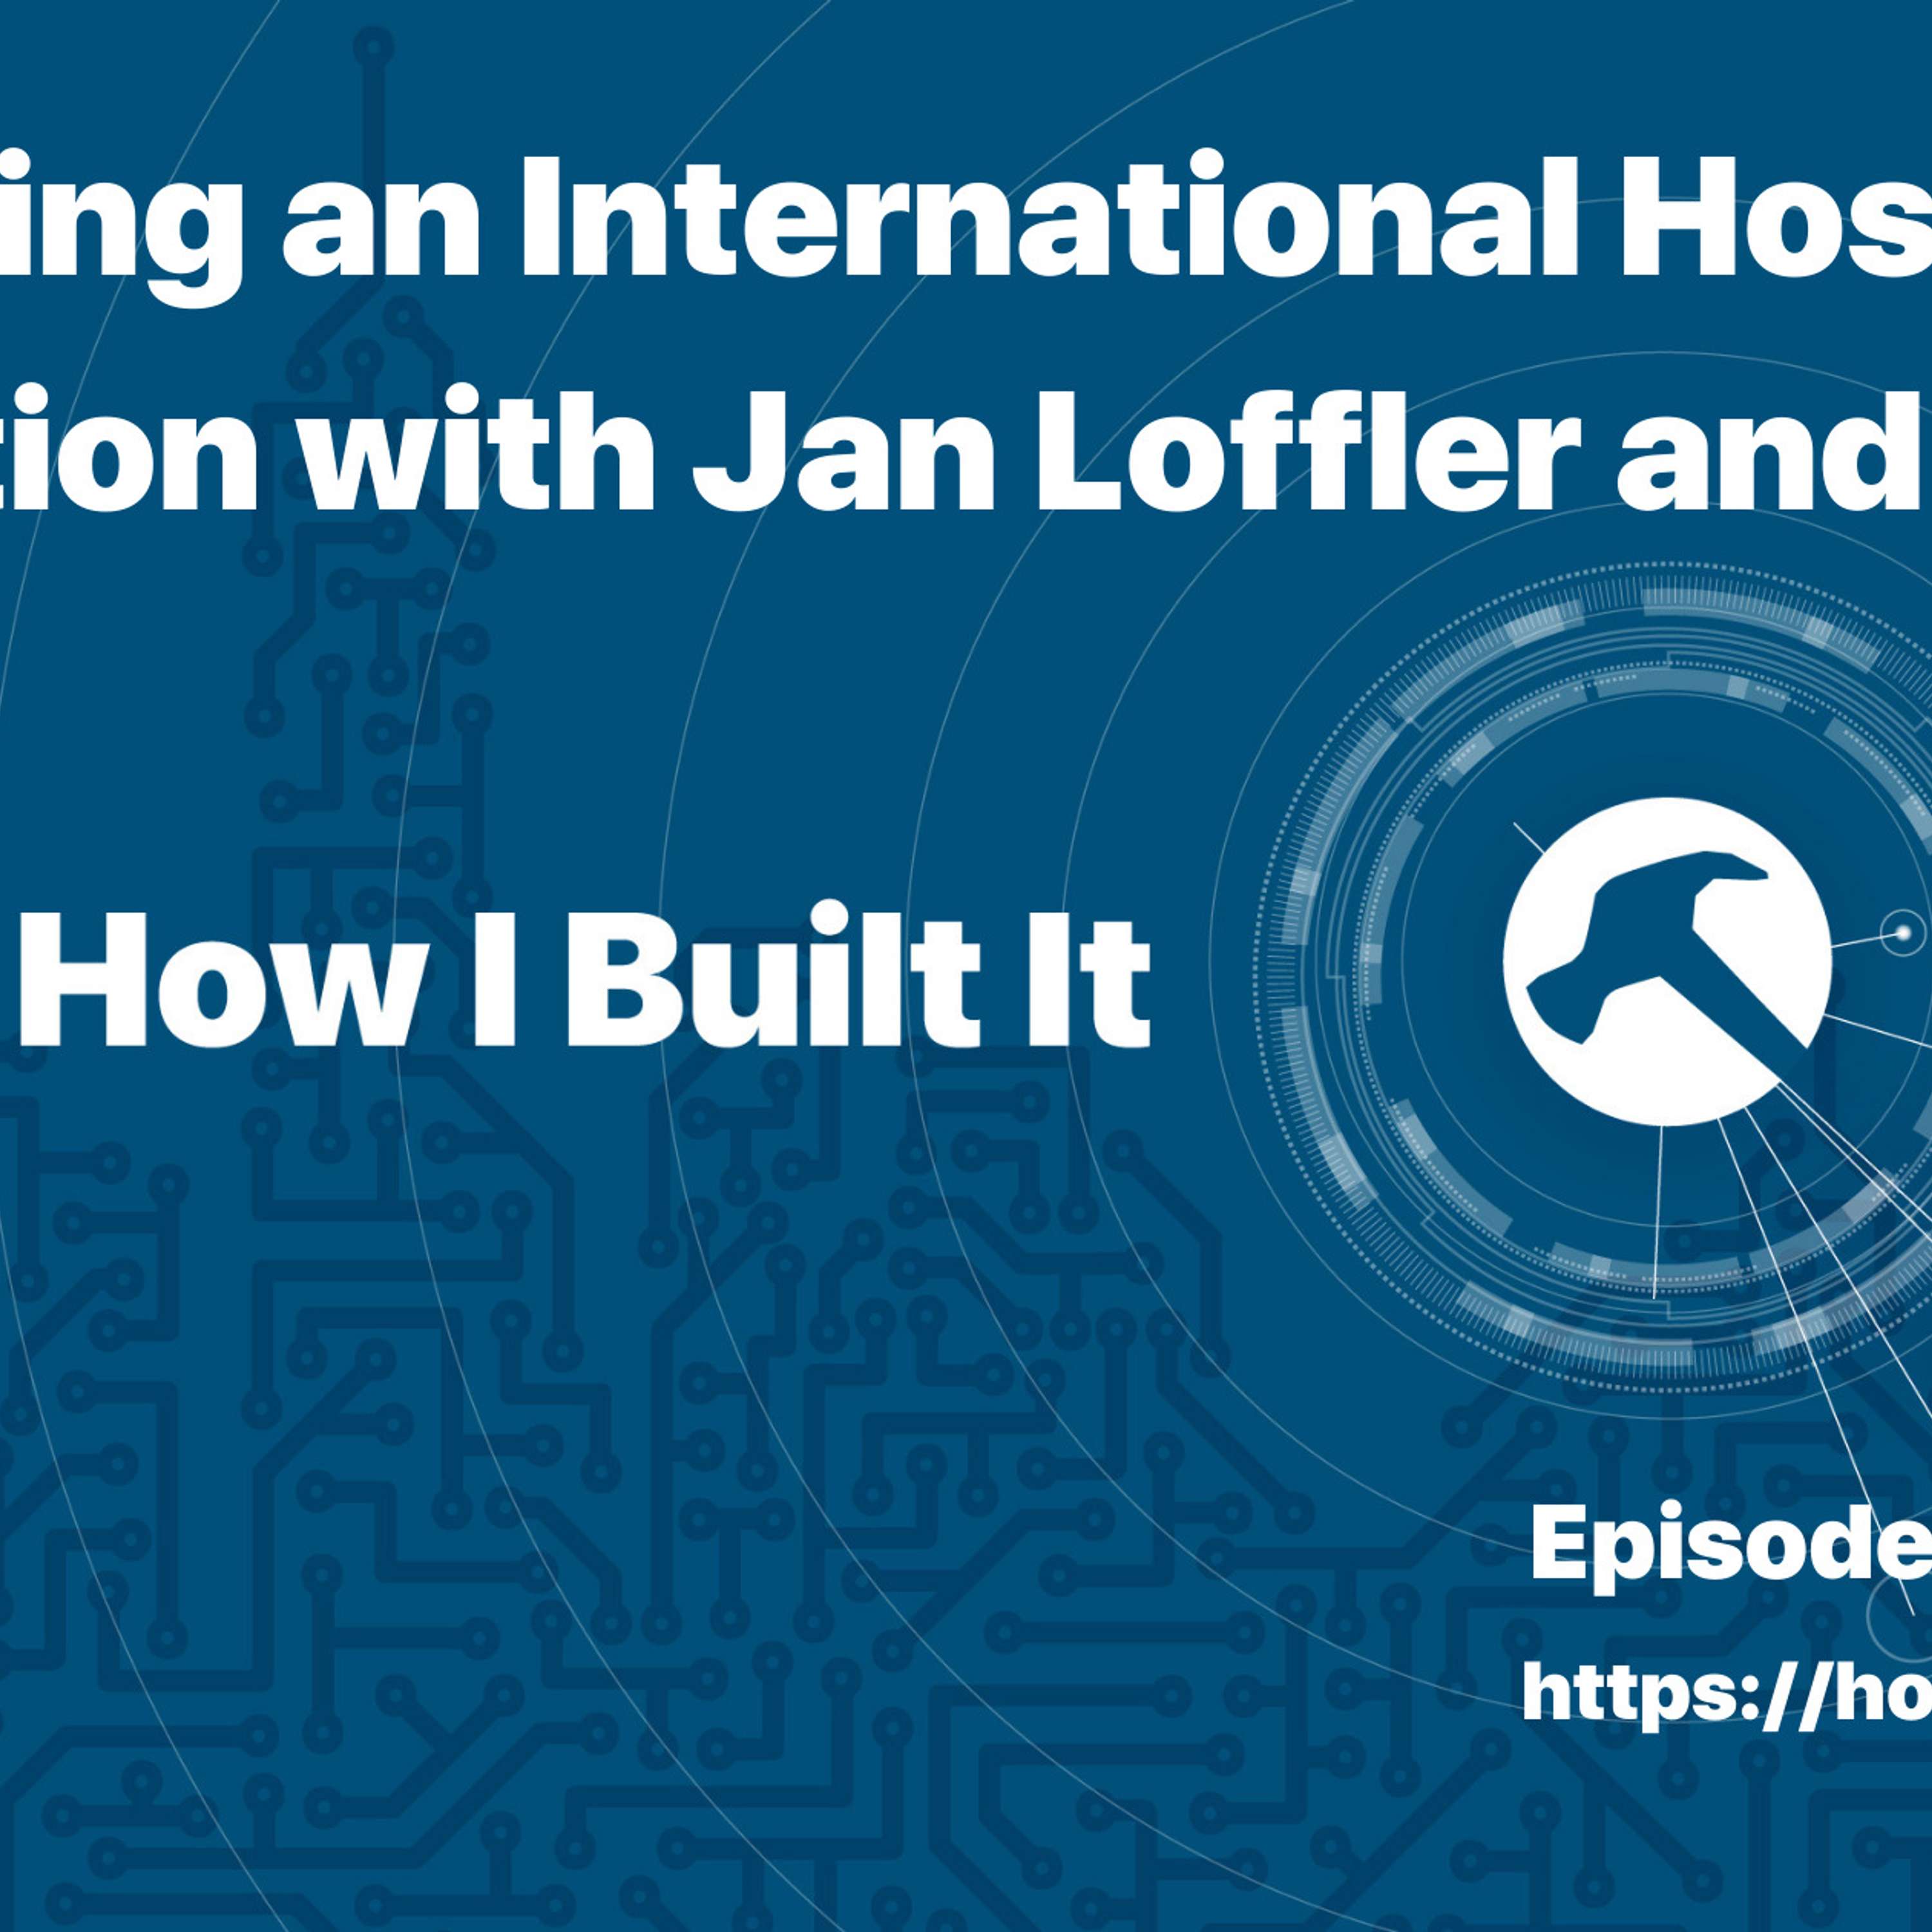 Building an International Hosting Solution with Jan Loffler and Plesk